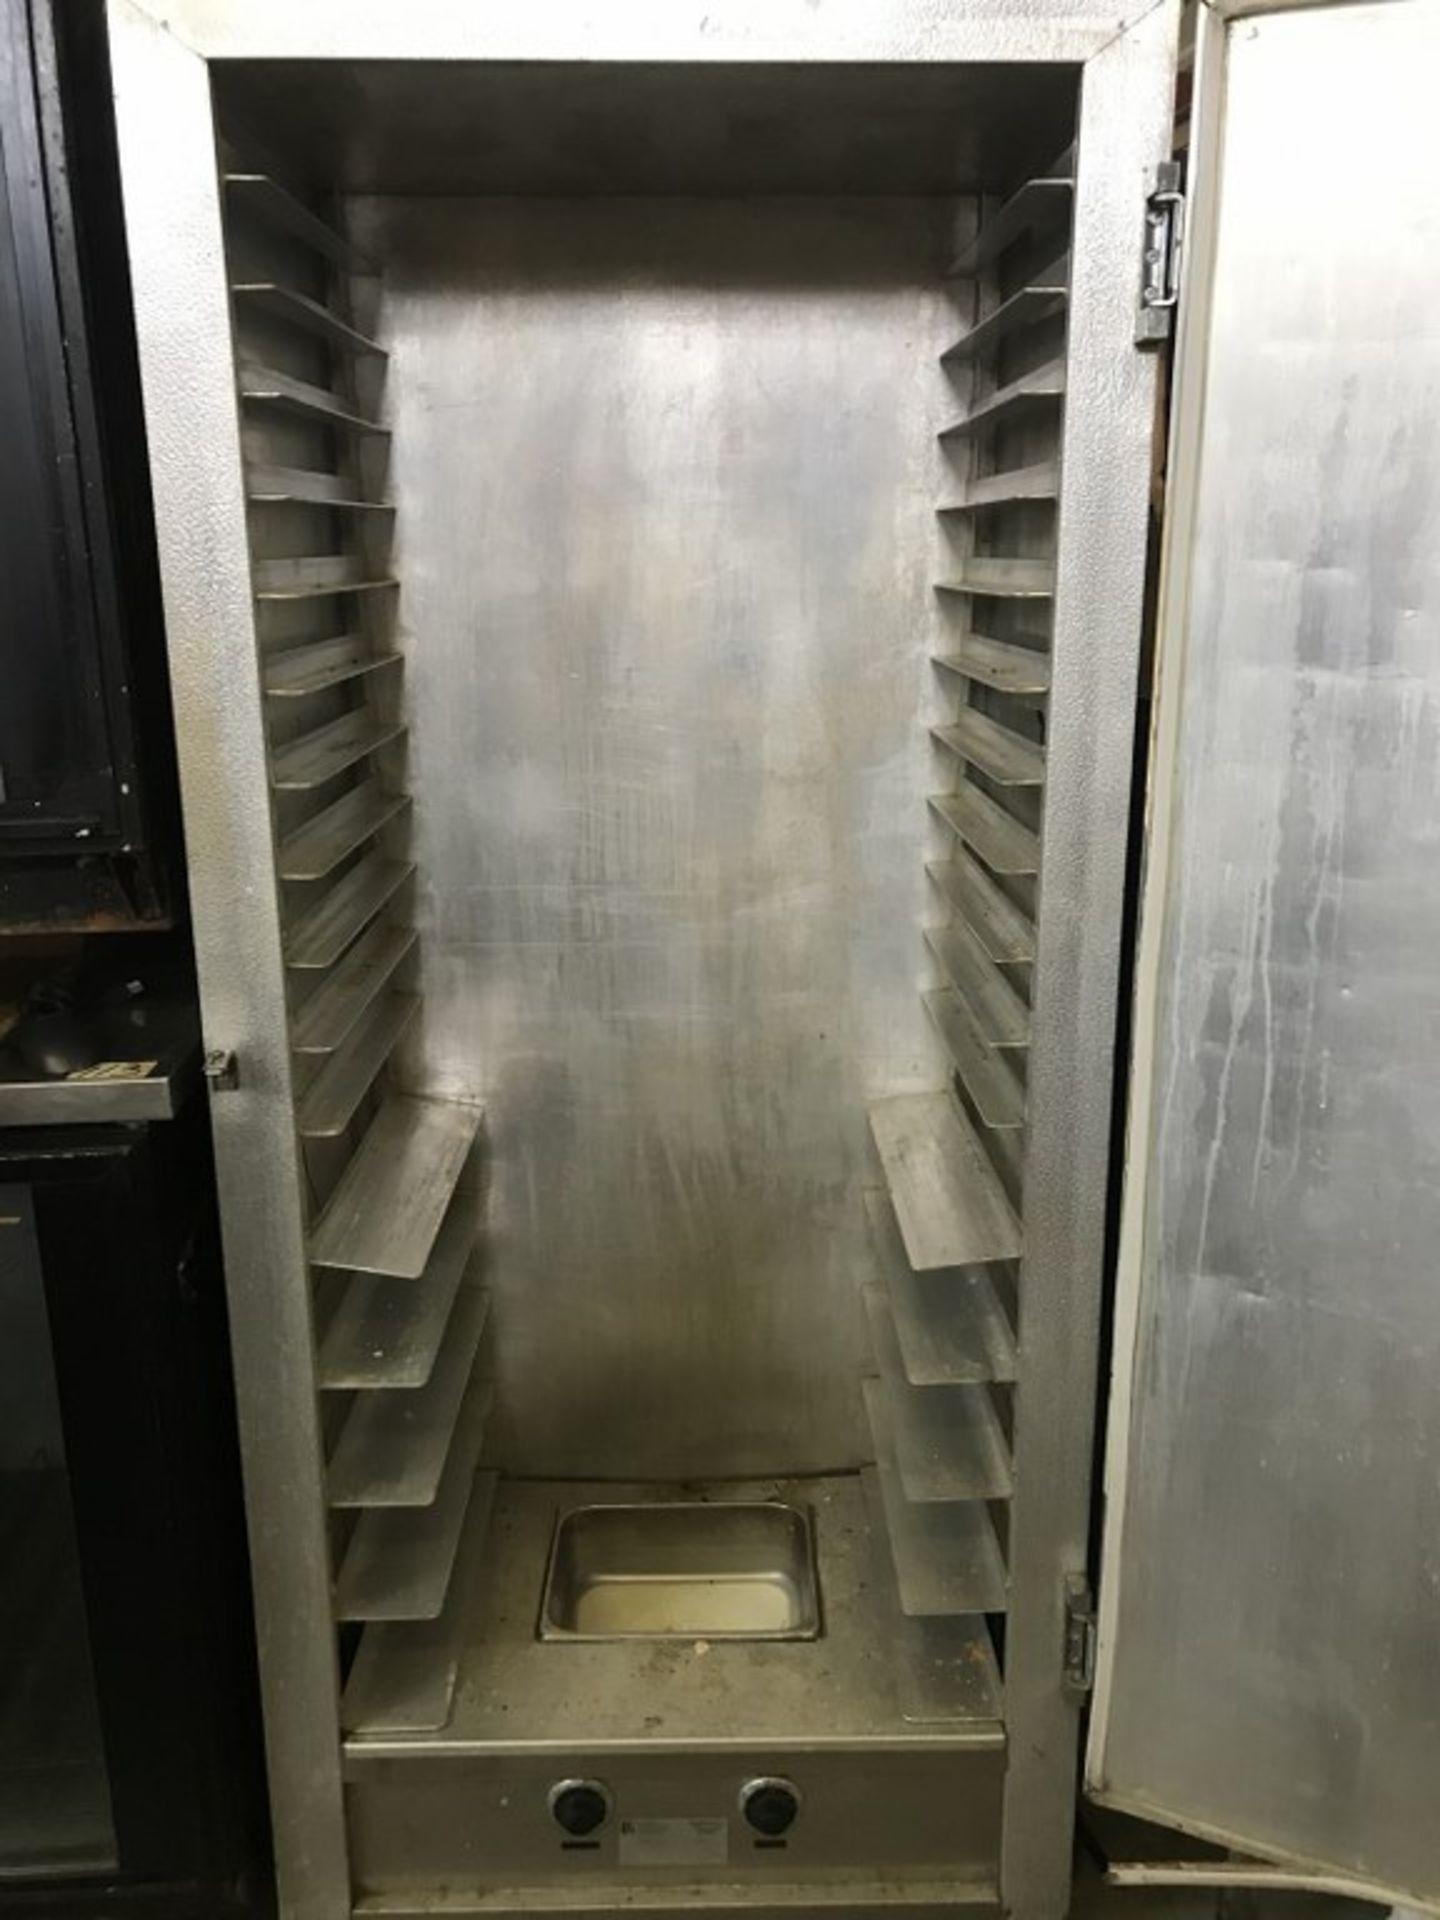 G. CINELLI - HEATED TRAY BAKERS RACK CABINET - Image 2 of 3